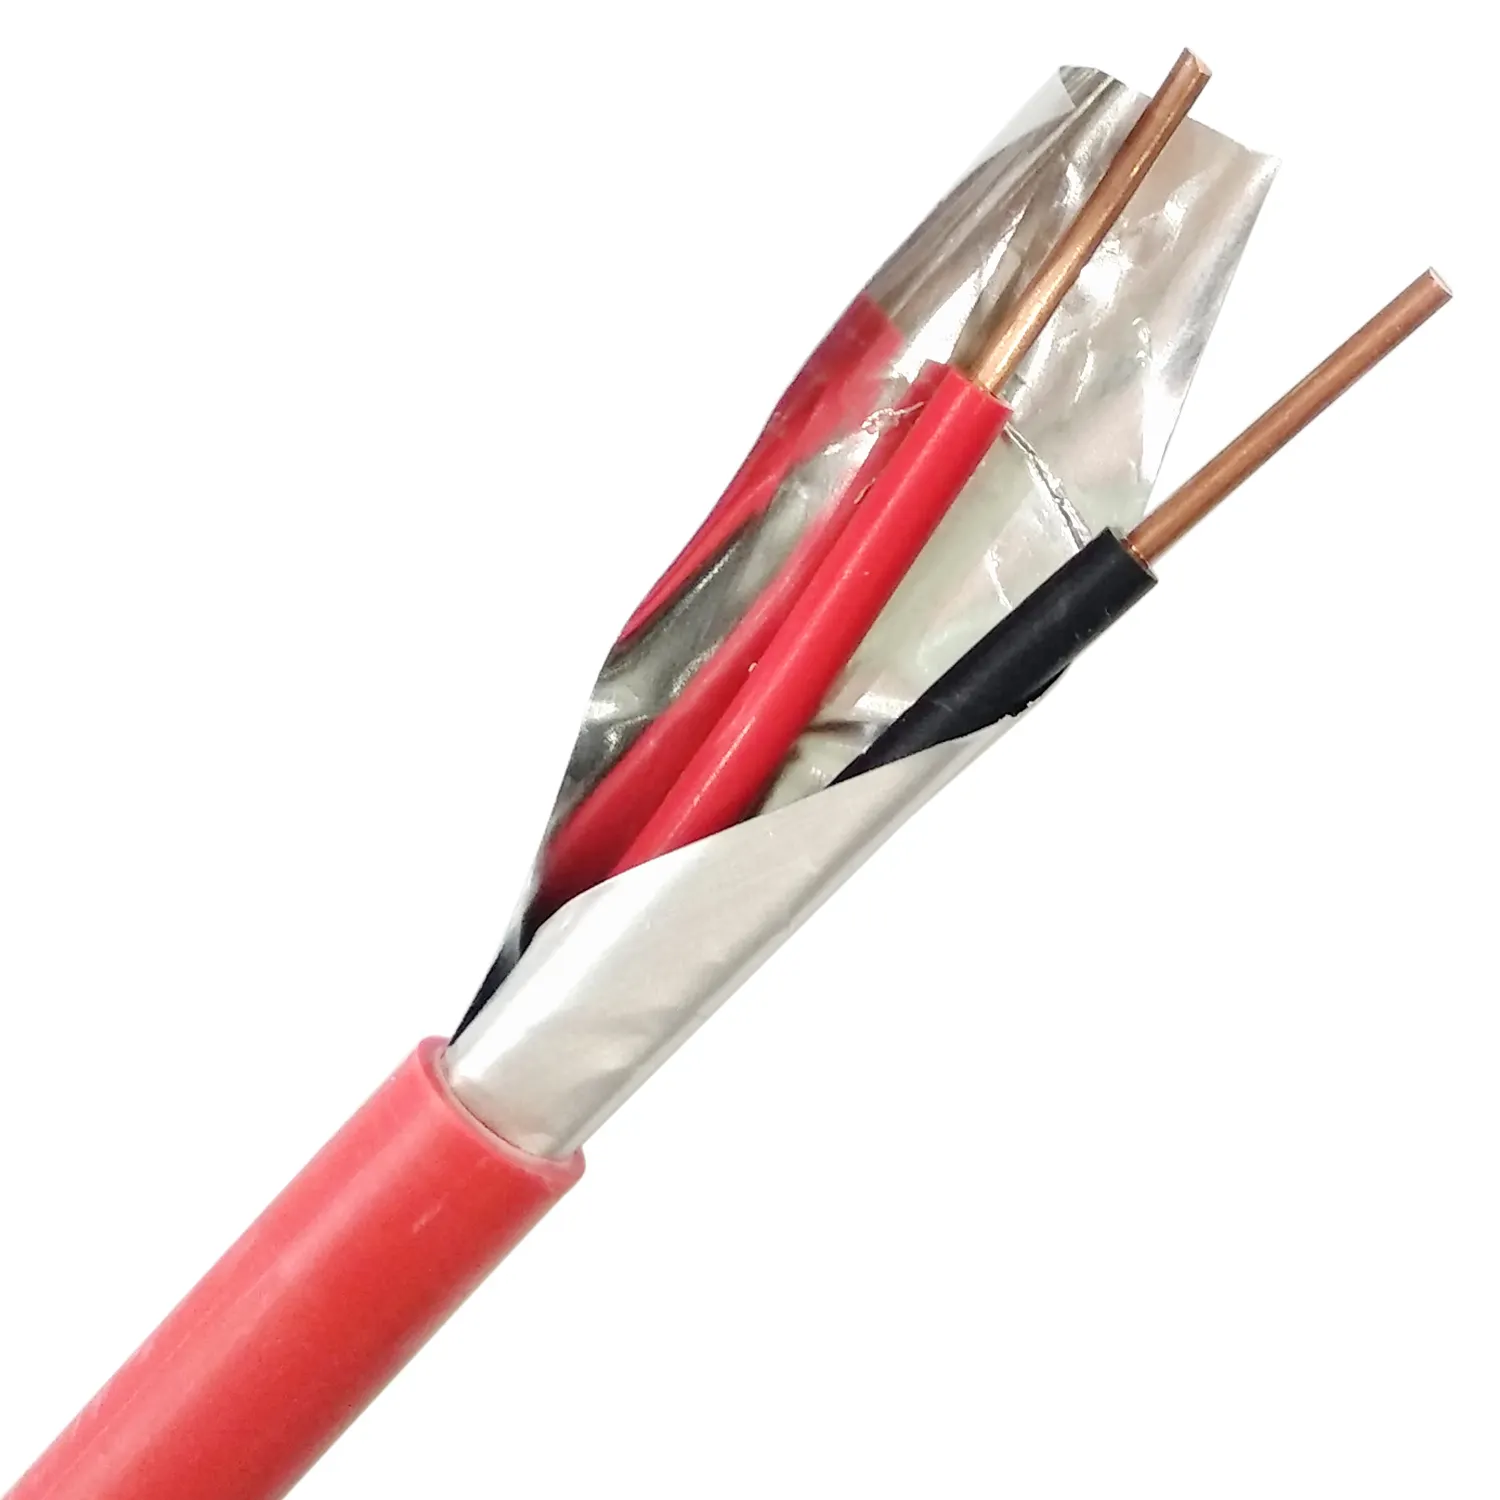 Fire Alarm Resistant Cables 2*1.5Mm2 Twisted Pair Fire Honeywell Cable Heat Resistance Ph30 Price Fire Alarm Cable